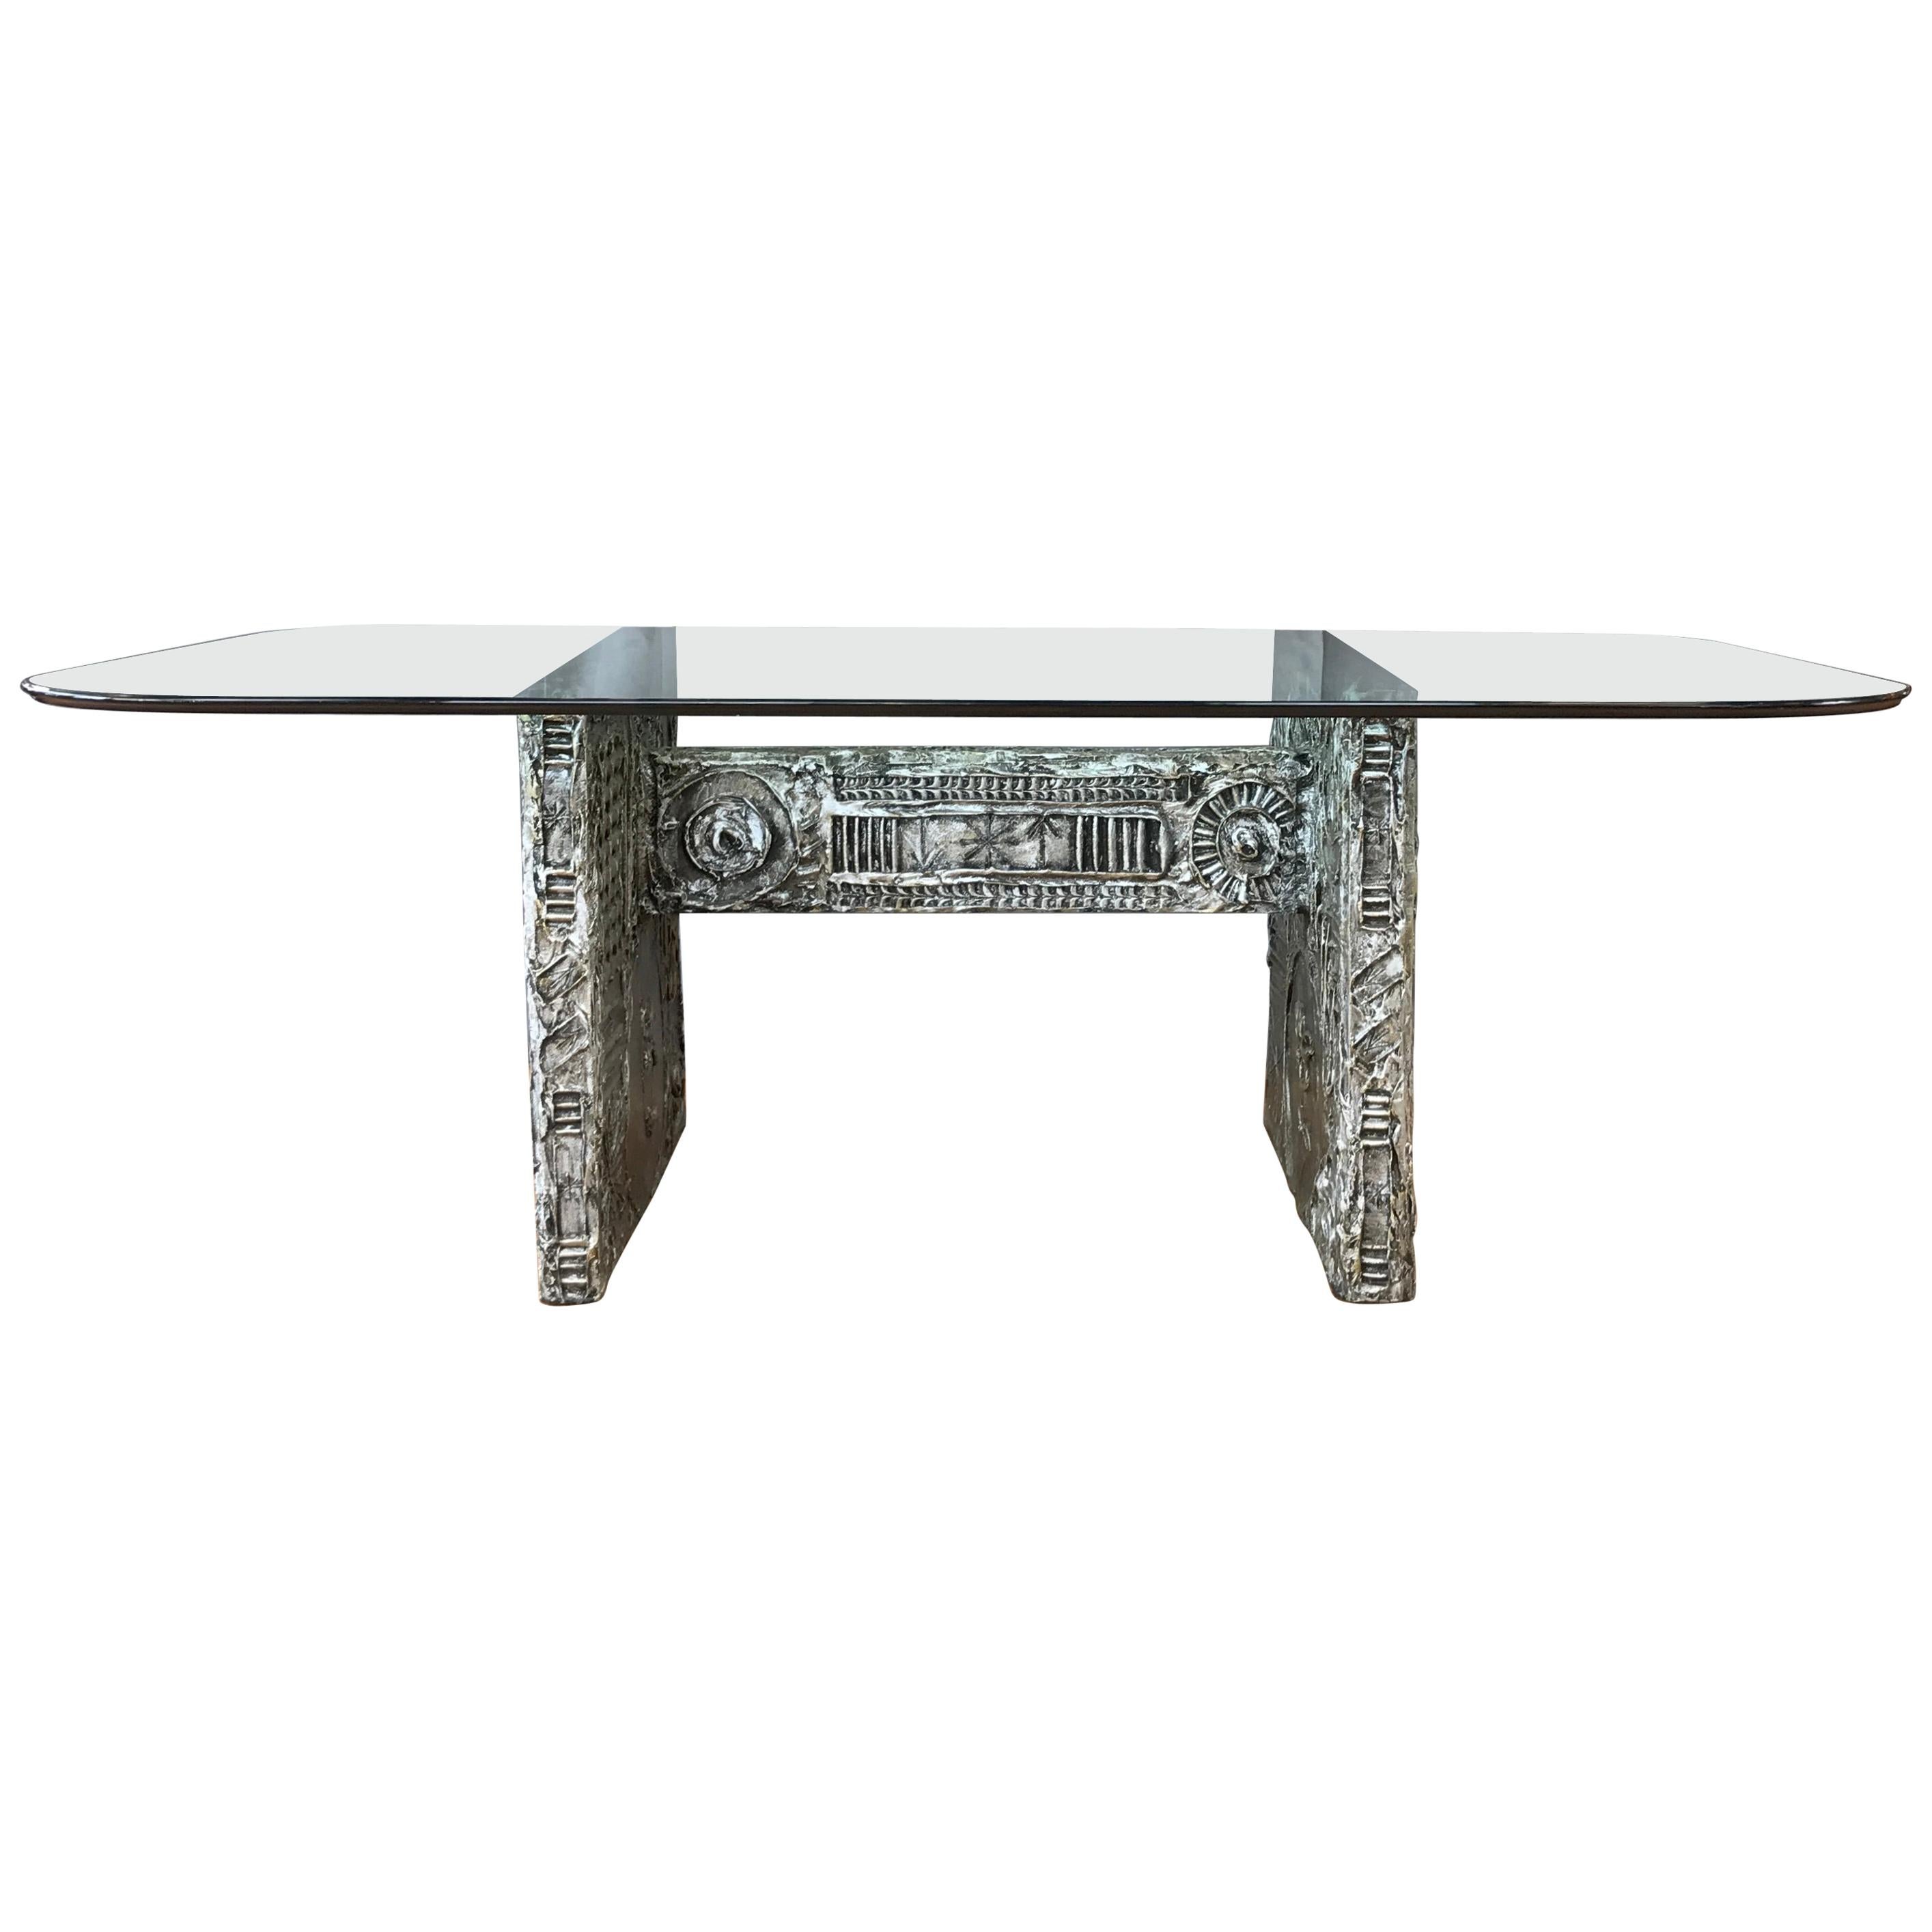 Adrian Pearsall for Craft Associates Brutalist Glass Top Dining Table